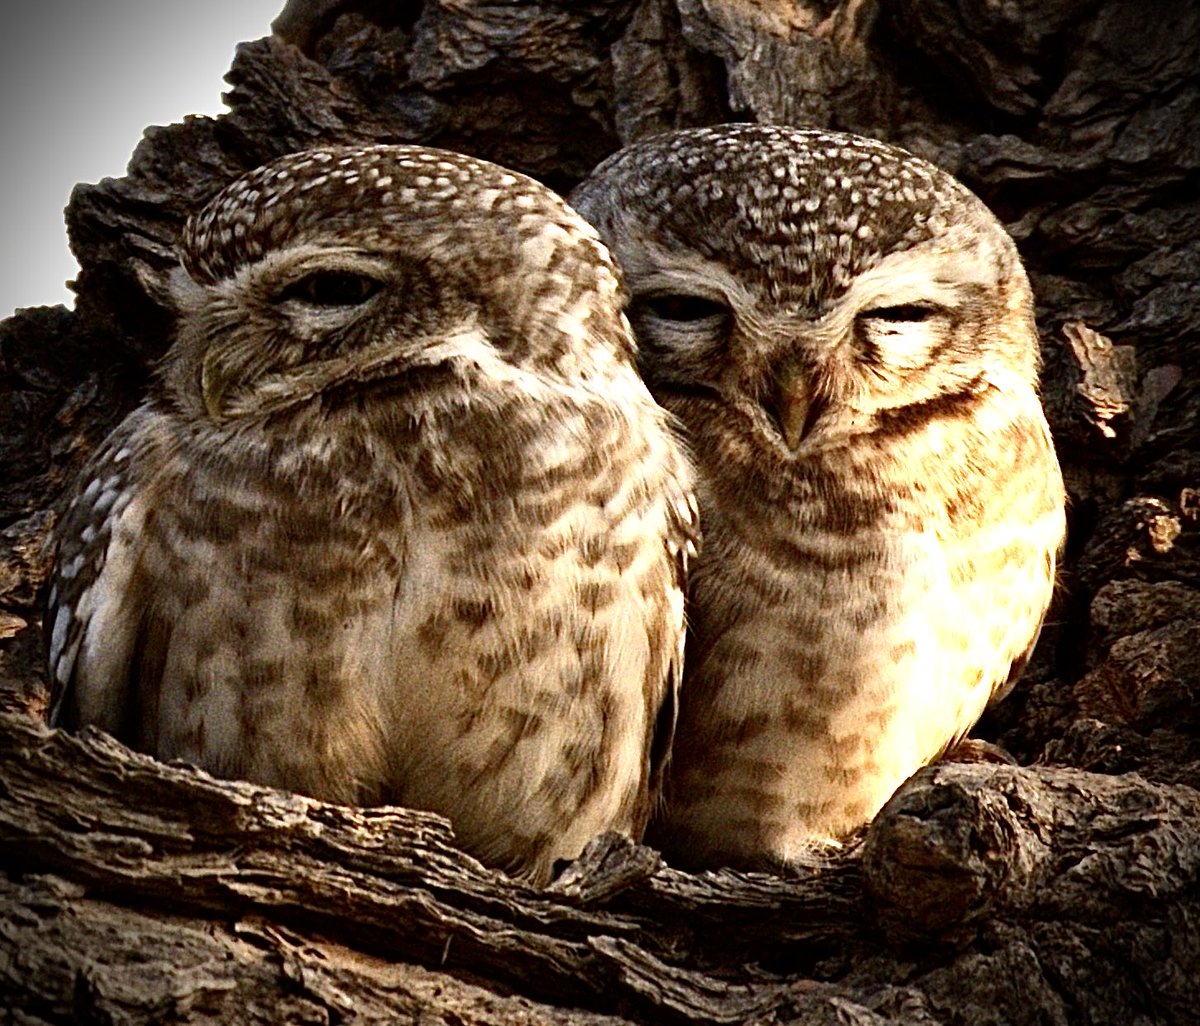 Spotted Owlets #Two2Tango #IndiAves theme for the day ⁦@IndiAves⁩